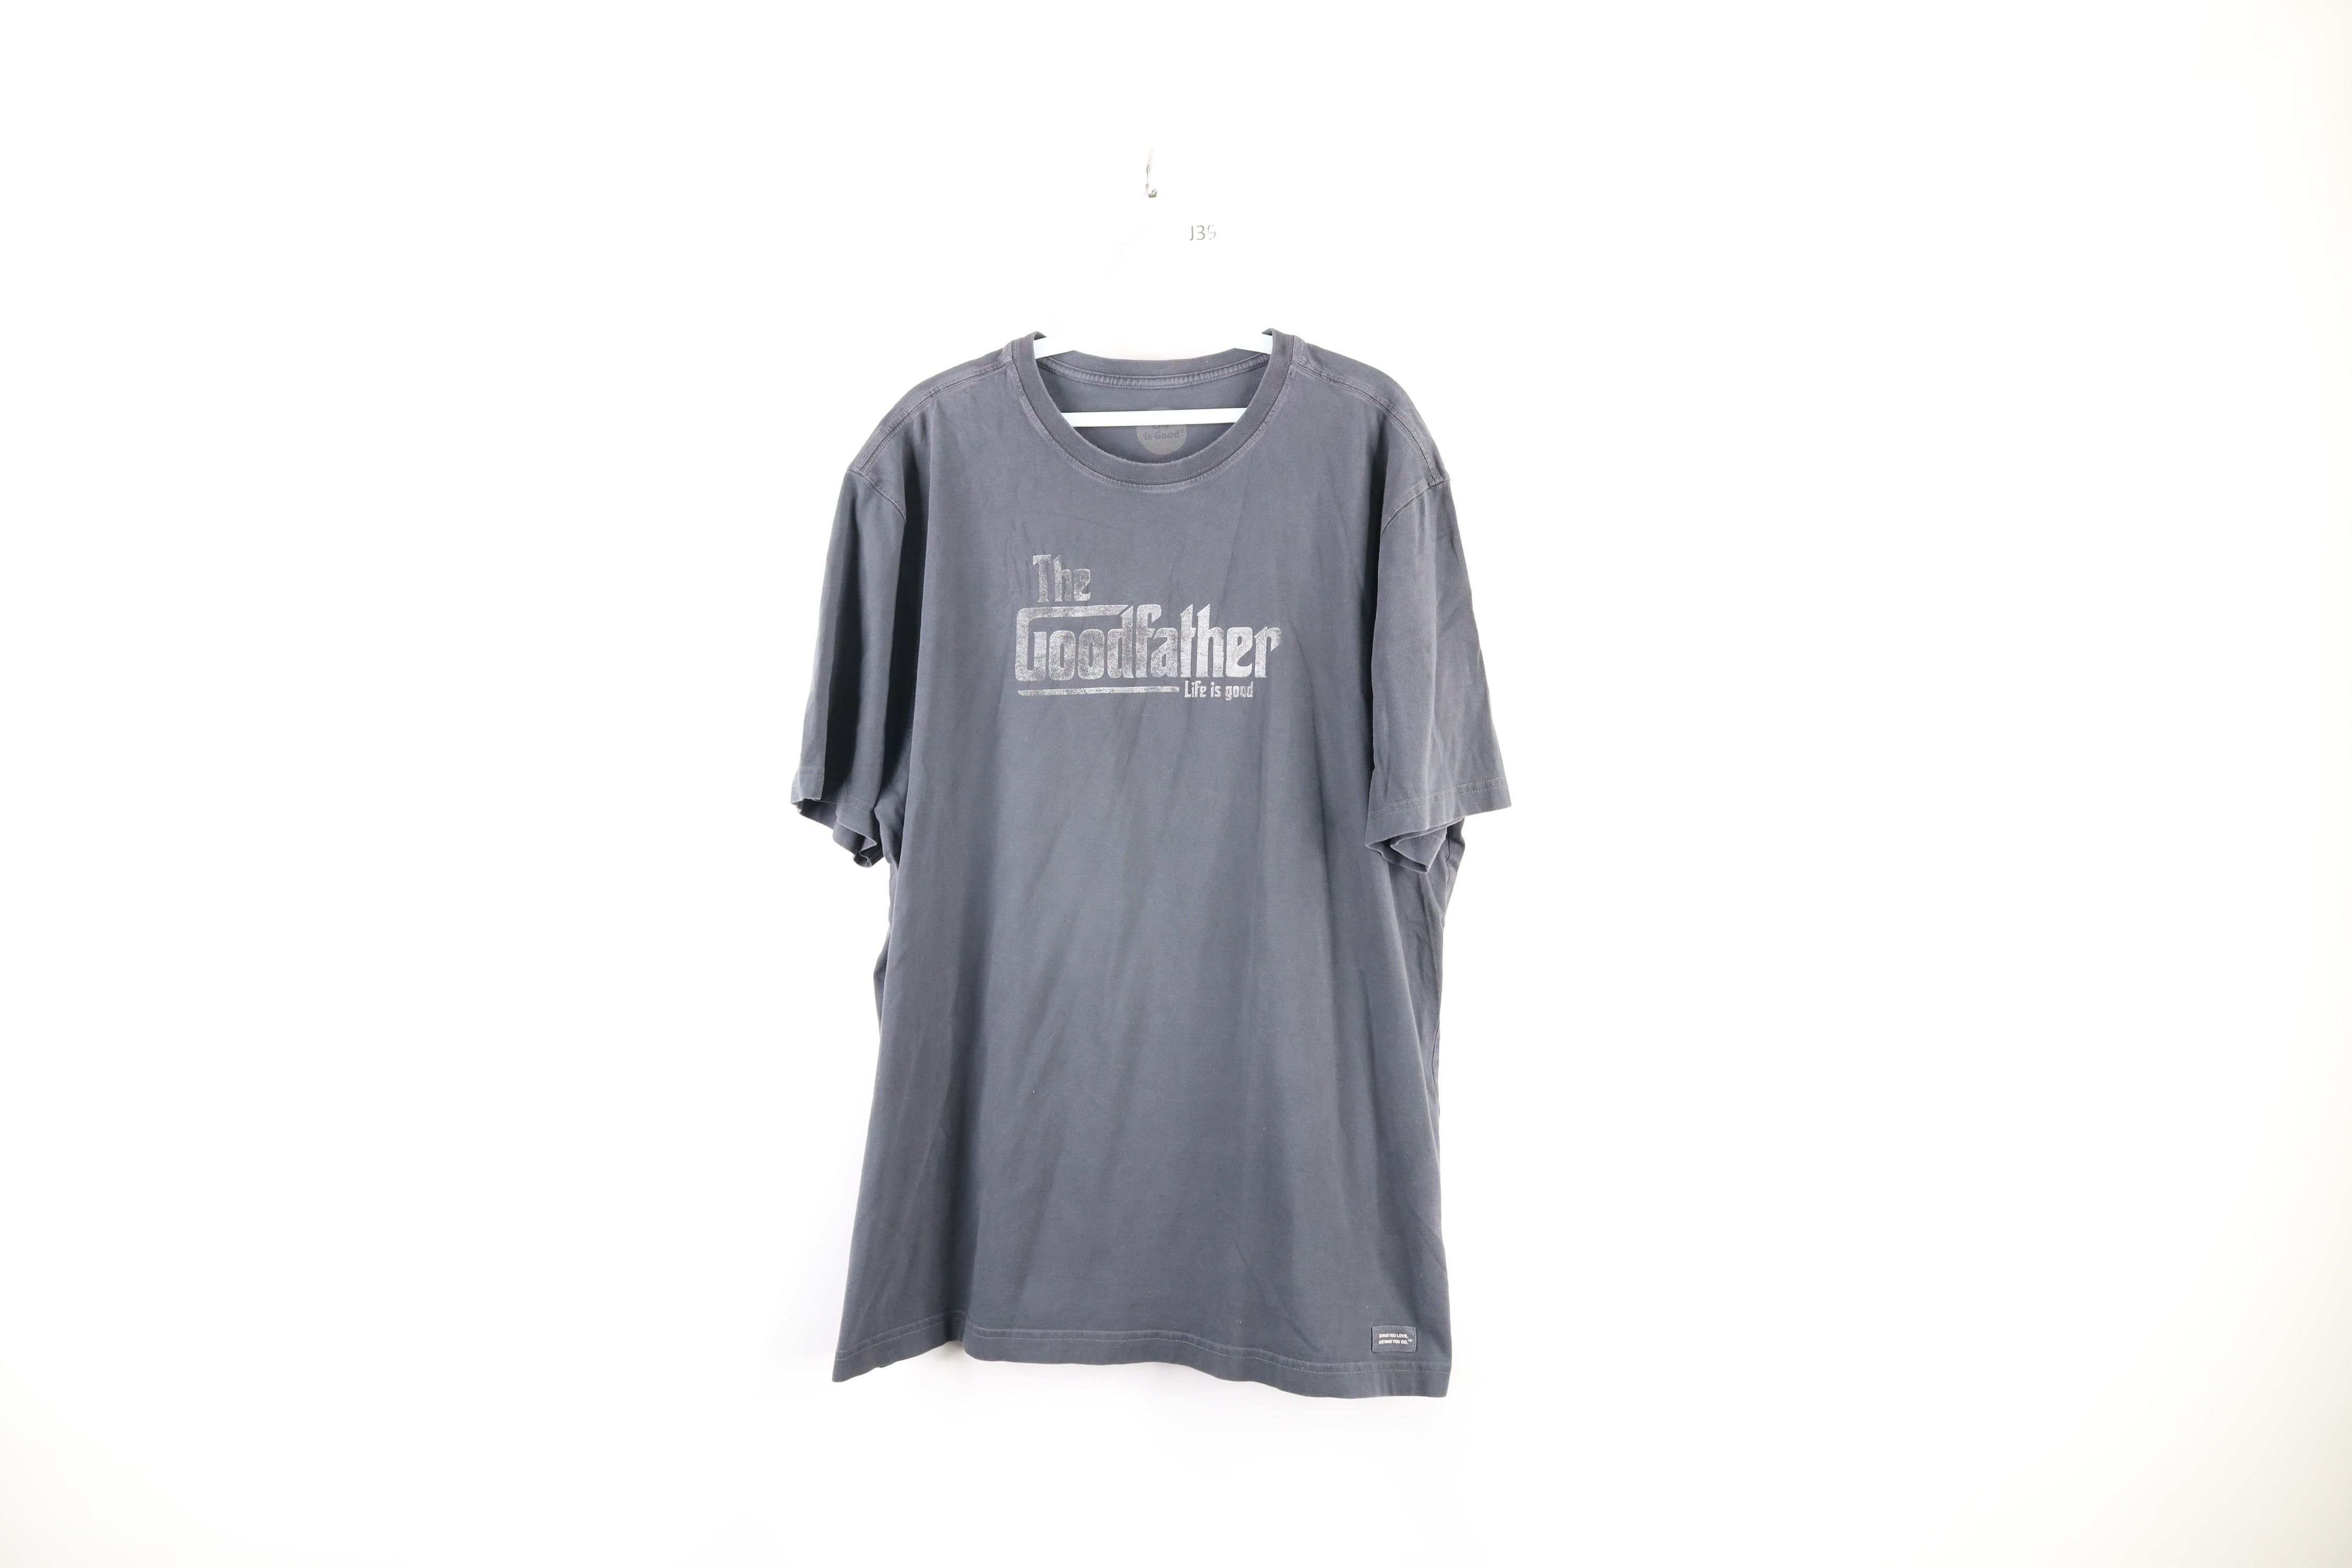 Vintage Life Is Good The Goodfather Short Sleeve T-Shirt Charcoa Size US XL / EU 56 / 4 - 1 Preview